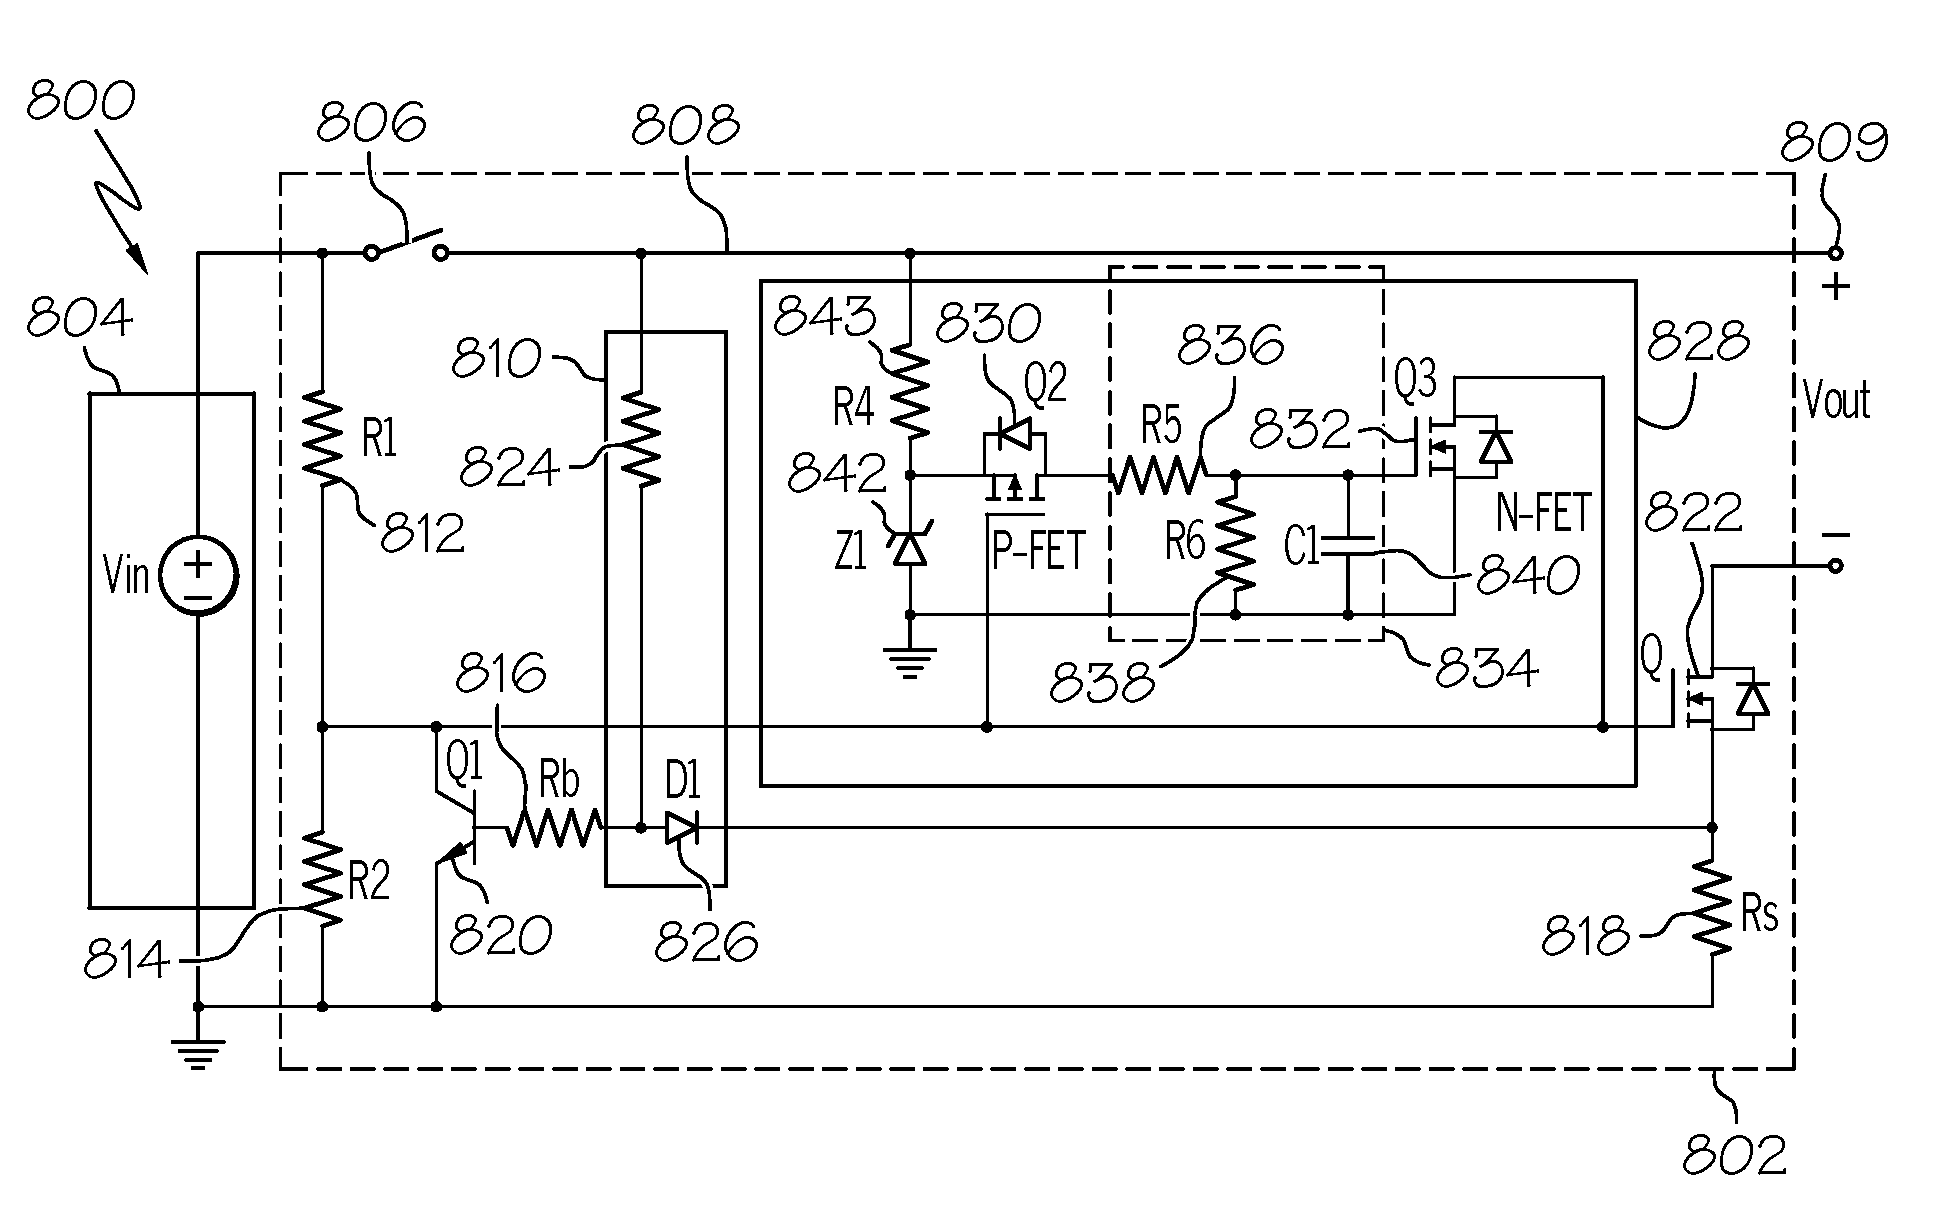 Advanced inrush/transient current limit and overload/short circuit protection method and apparatus for DC voltage power supply